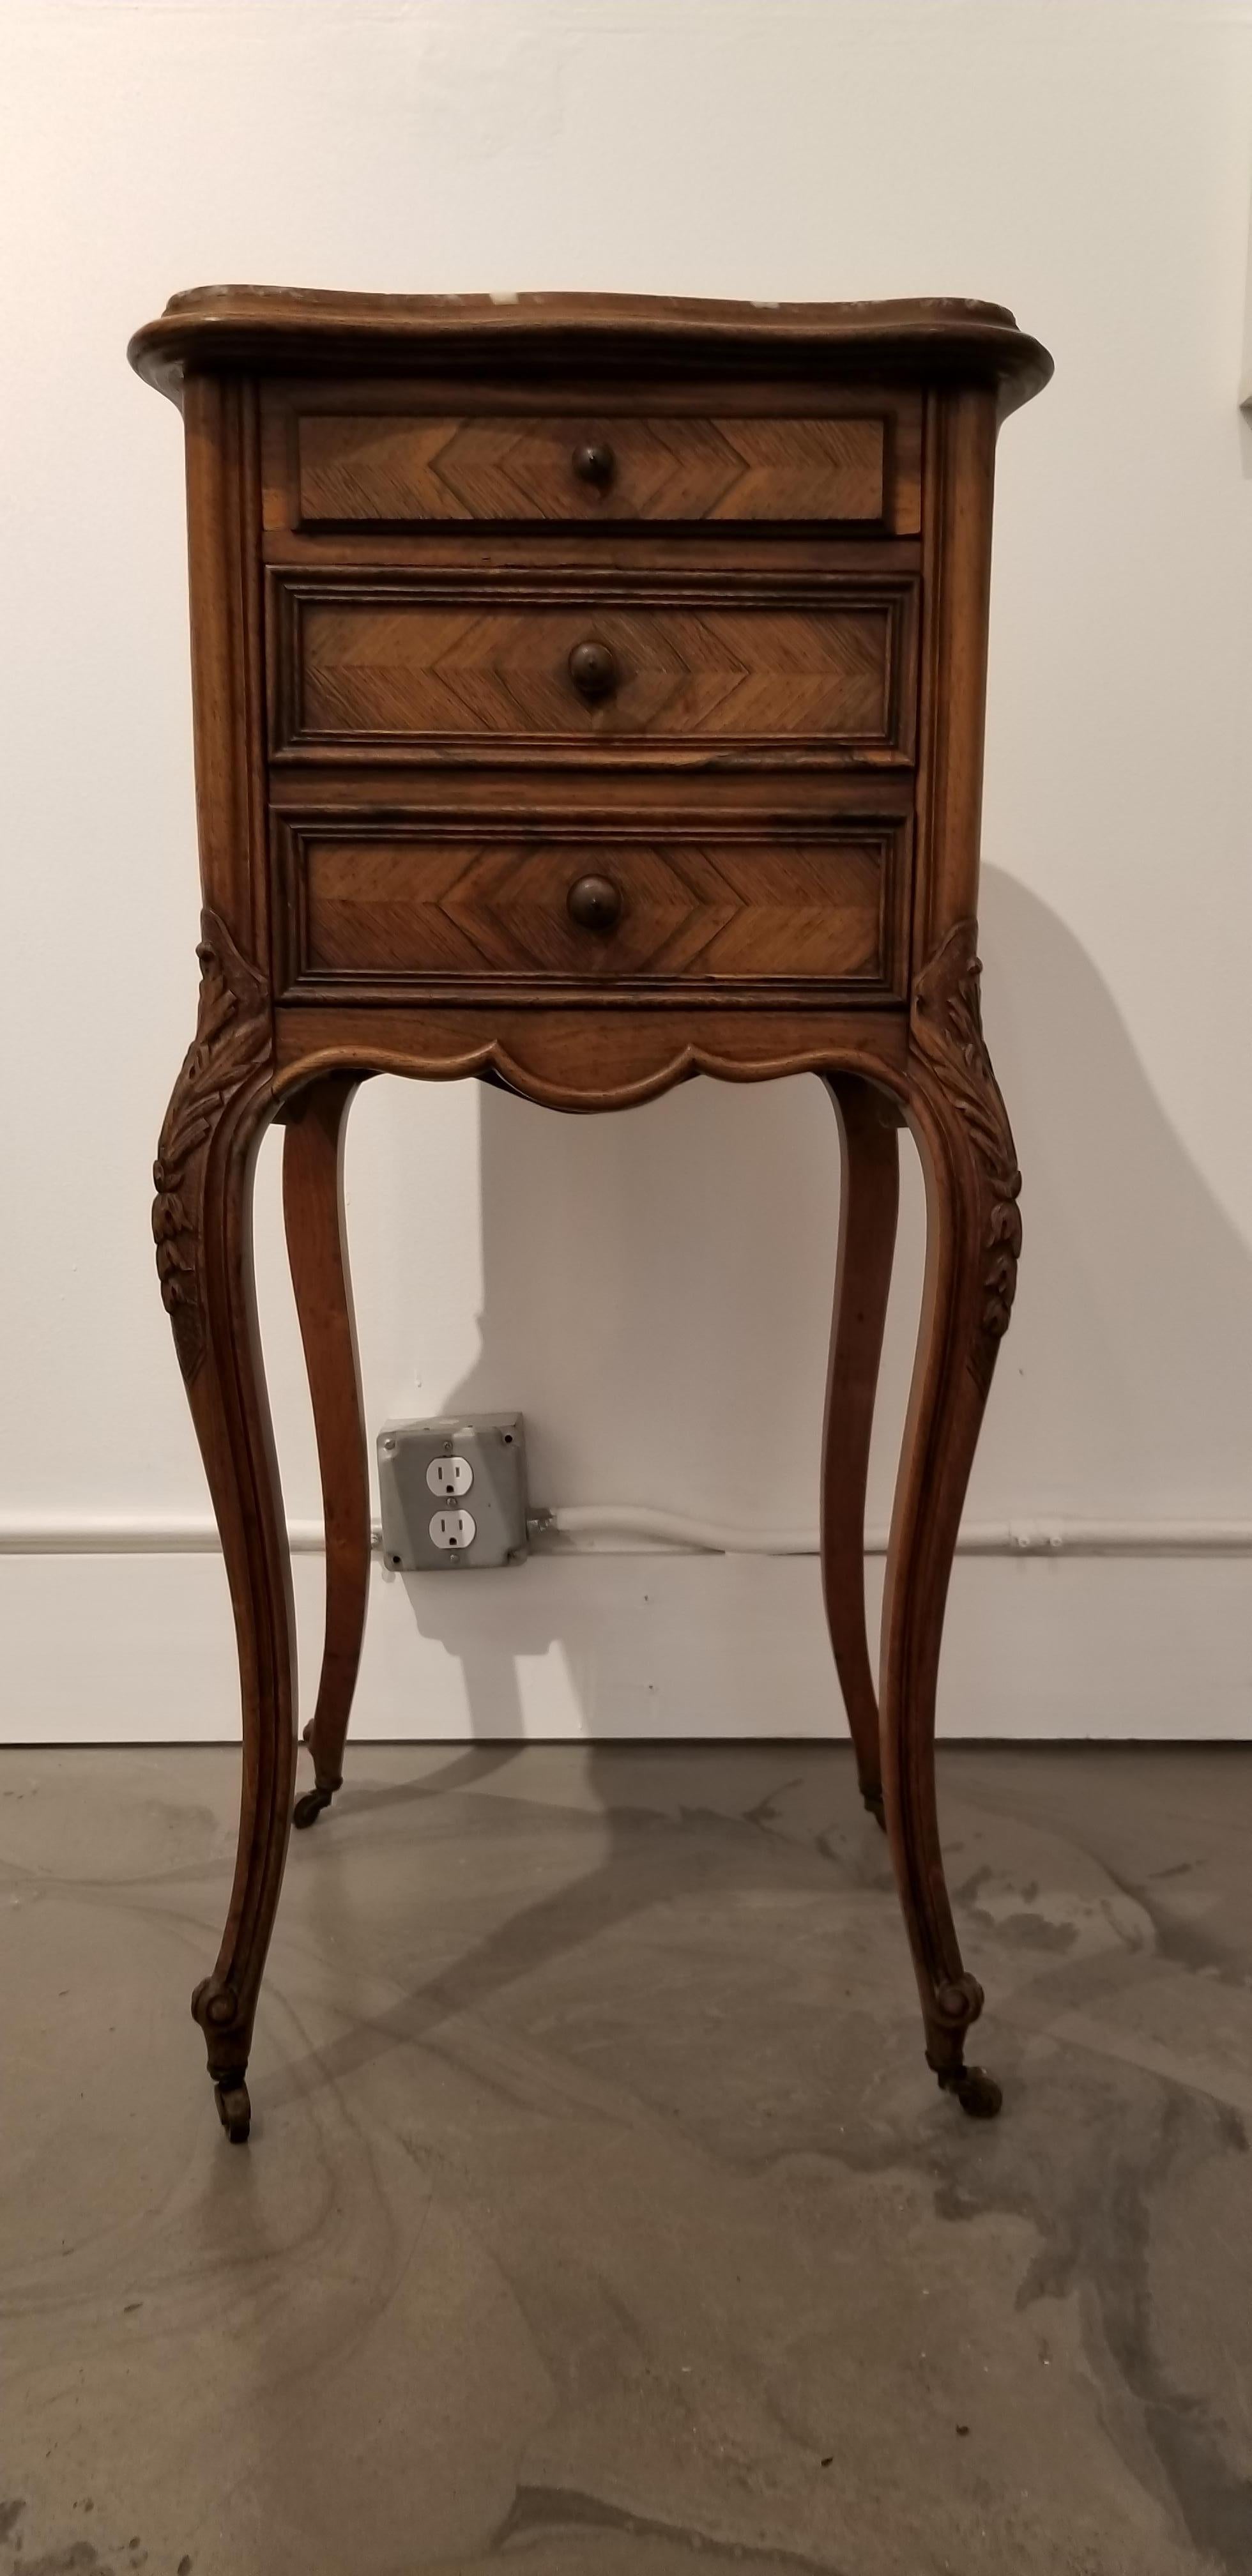 Exceptional early 20th century French rosewood and marble bedside or end table. Cabriole legs crafted in solid rosewood with book-matched rosewood sides, drawer faces and back. Sculpted top with original curved marble inset top with bevel. Marble